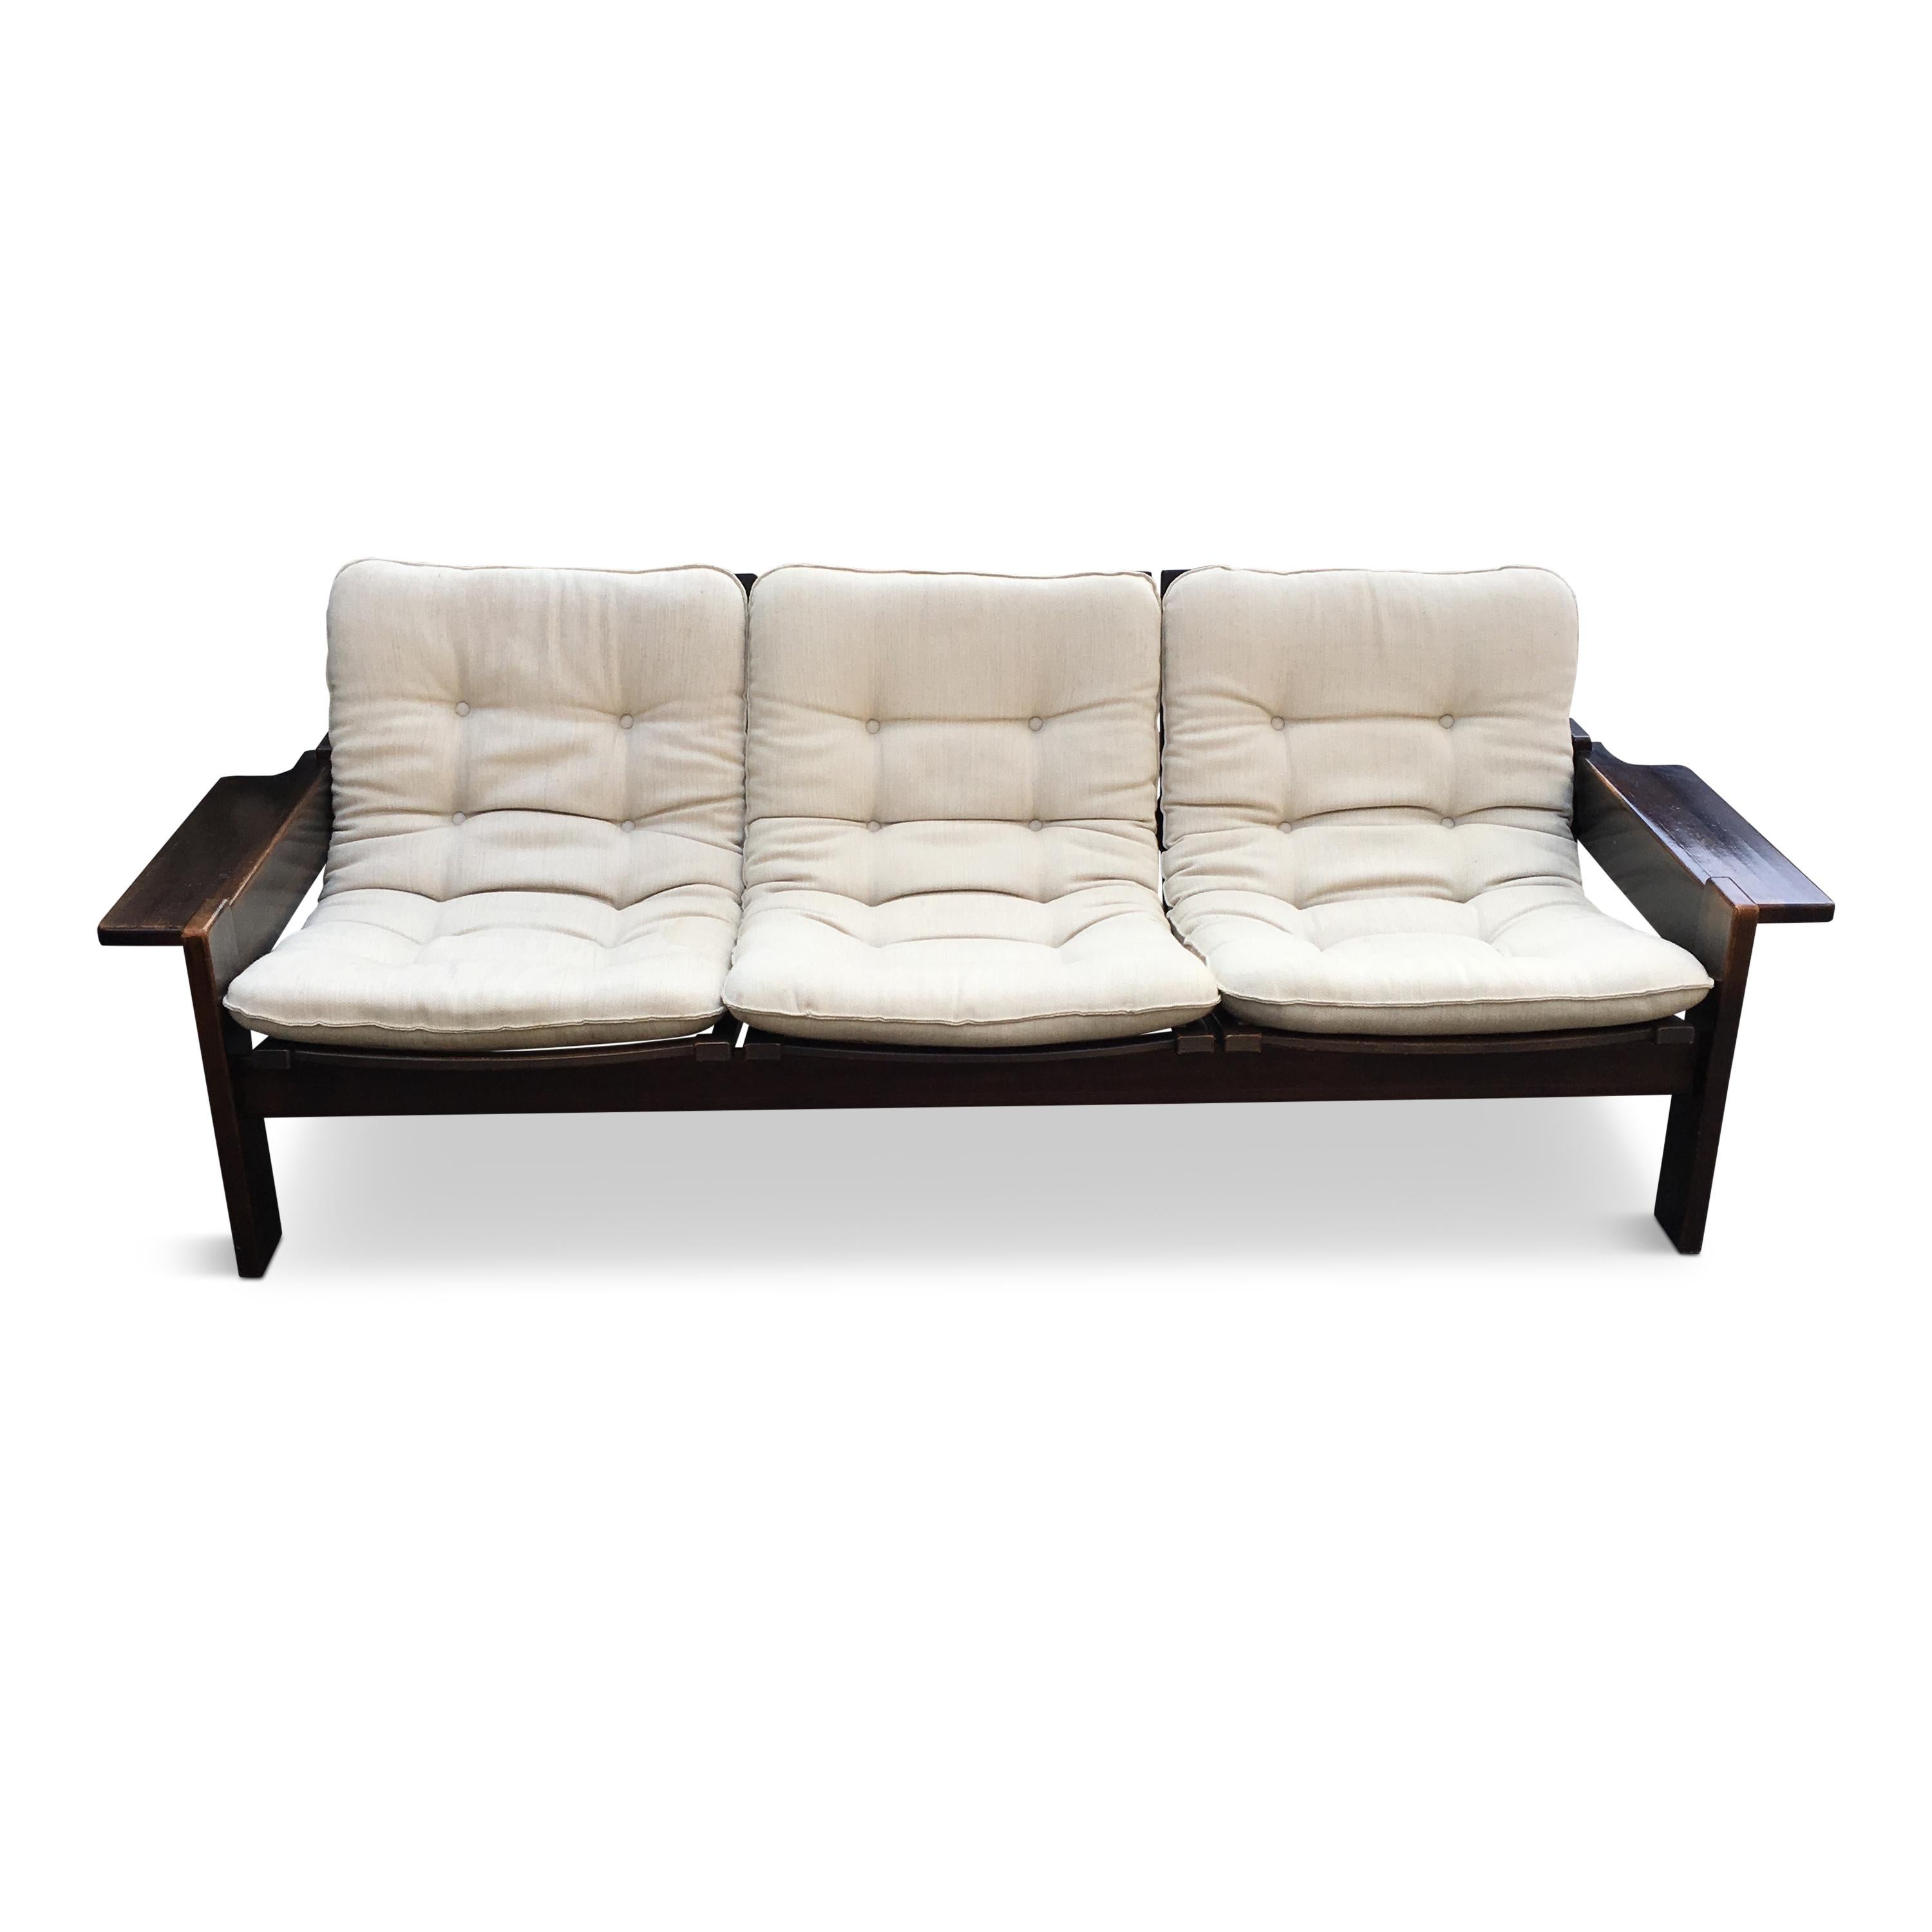 Modernist form, dark wood, the armrests can be used as side tables.

Fully original condition – white/beige wool upholstery (needs to be reupholstered because of stains), each pillow has a frame inside (heavy). The wood has been